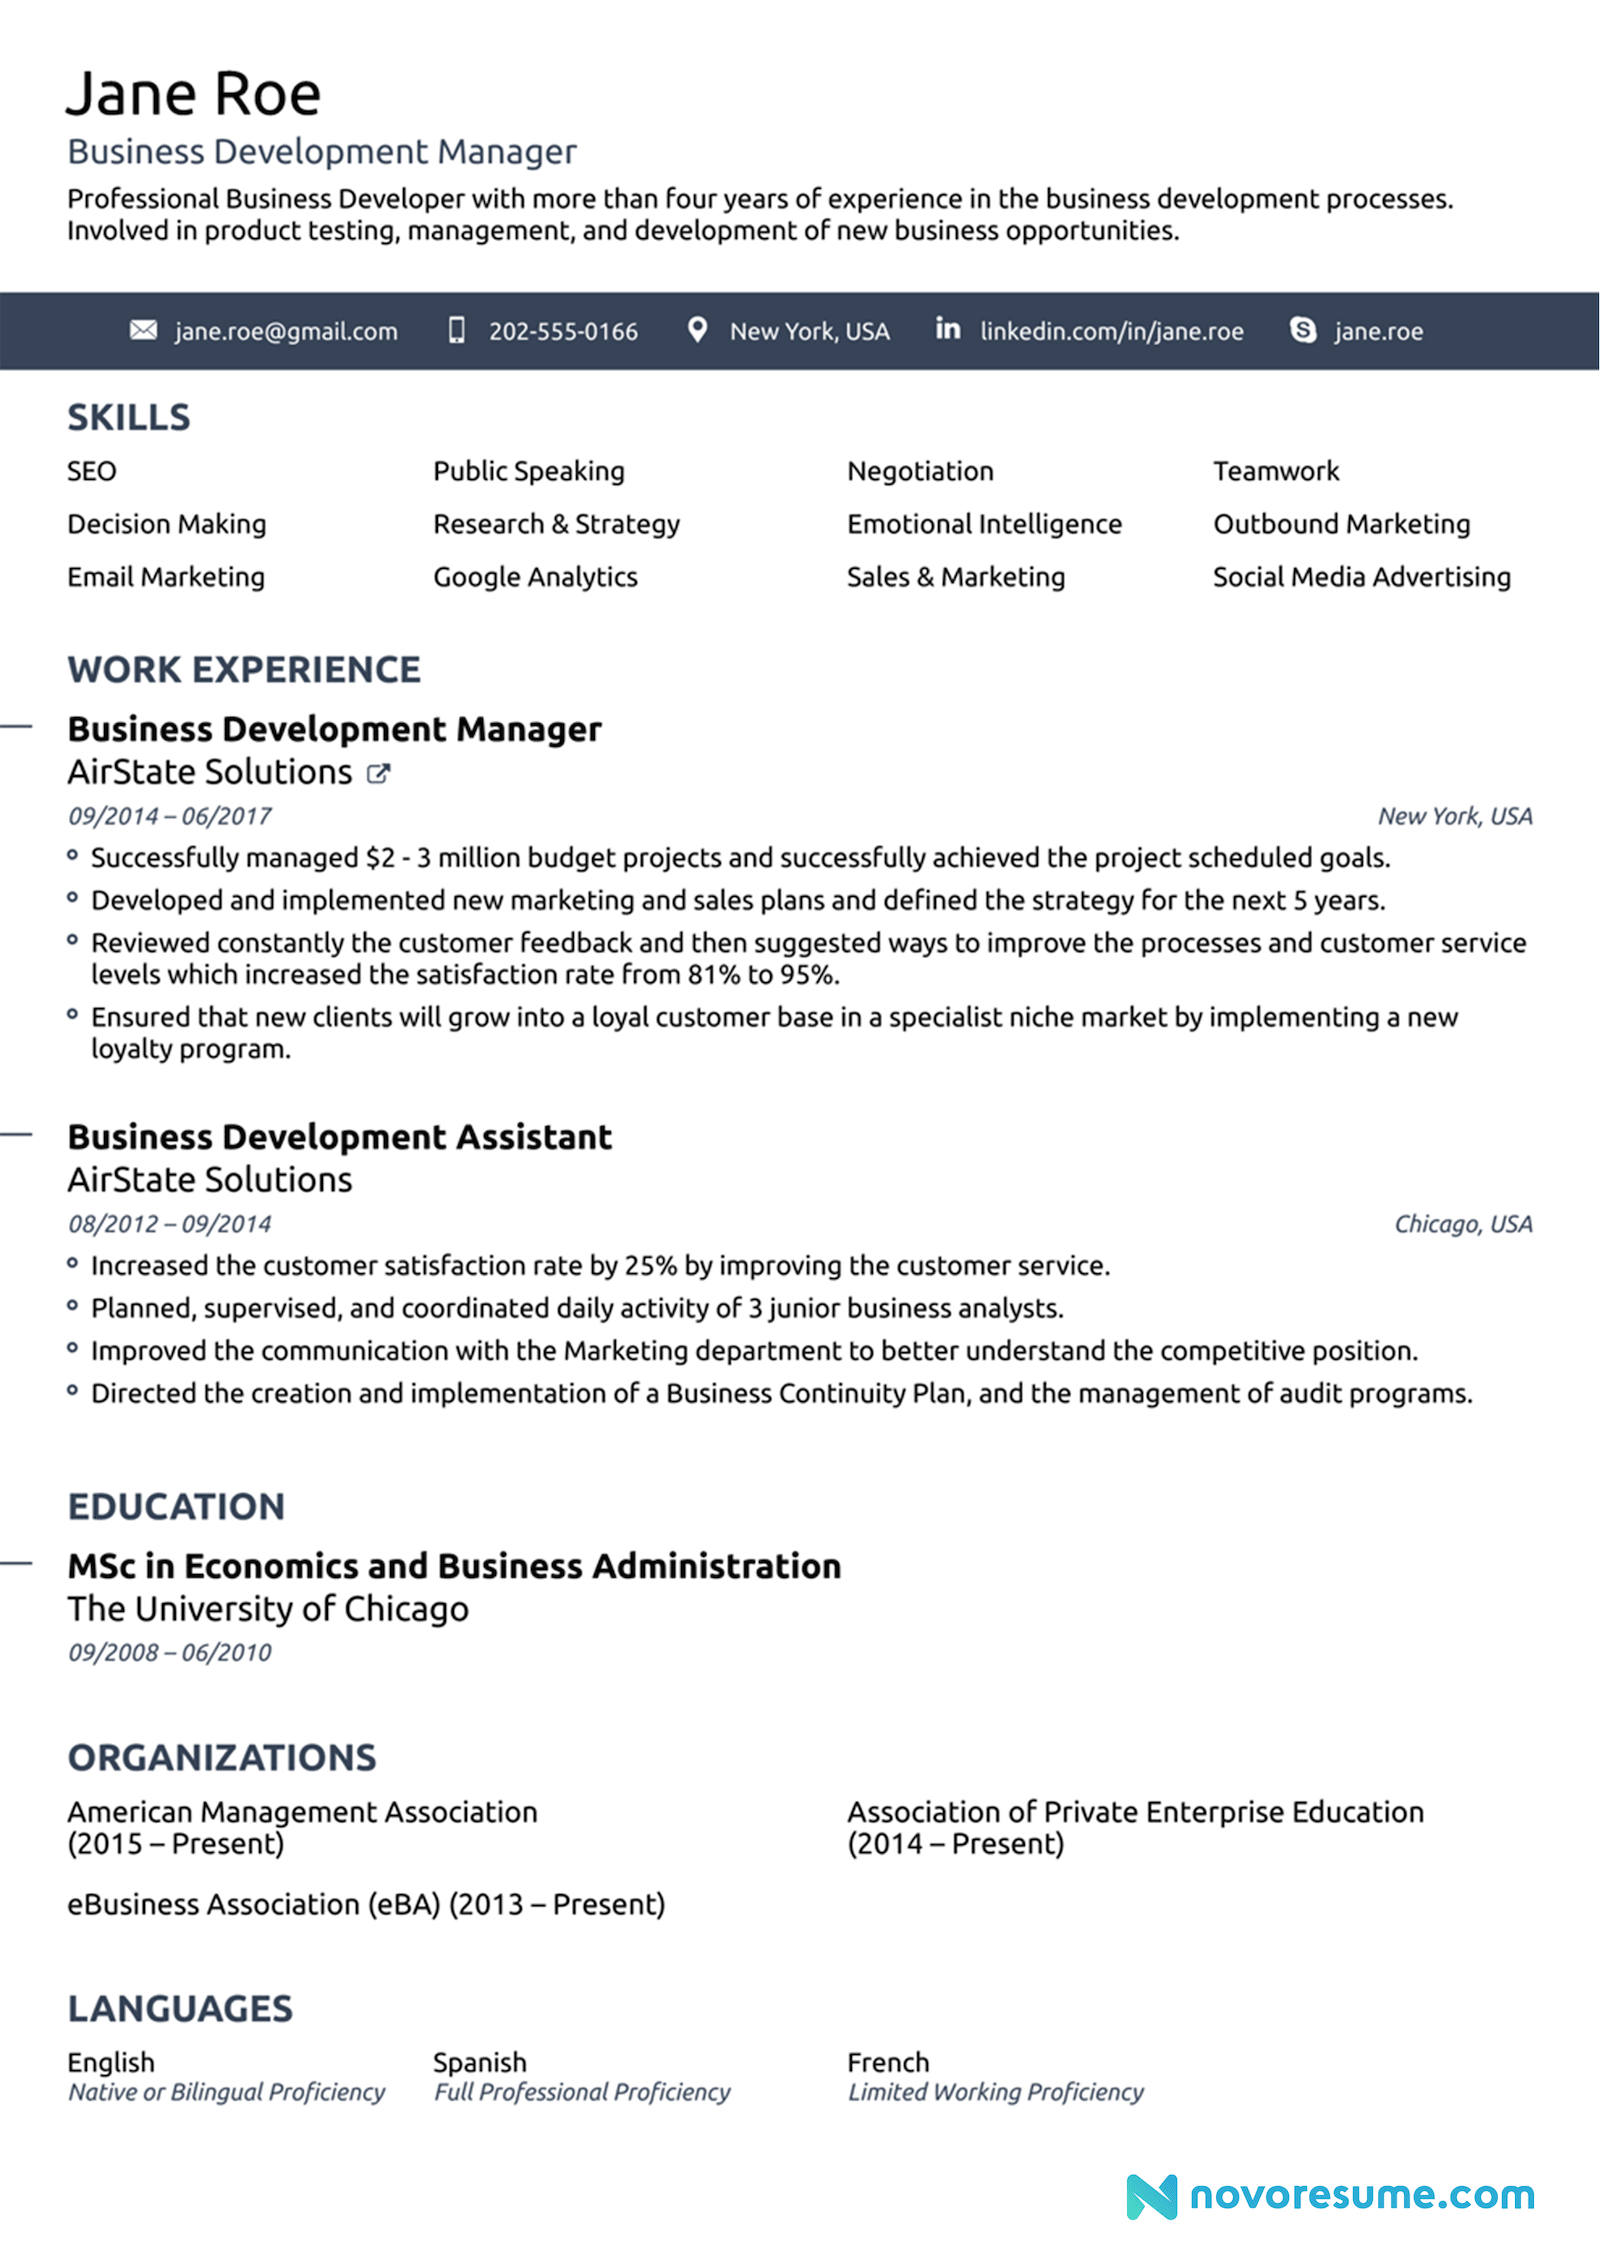 How to Write an ATS Resume [8+ Templates Included]